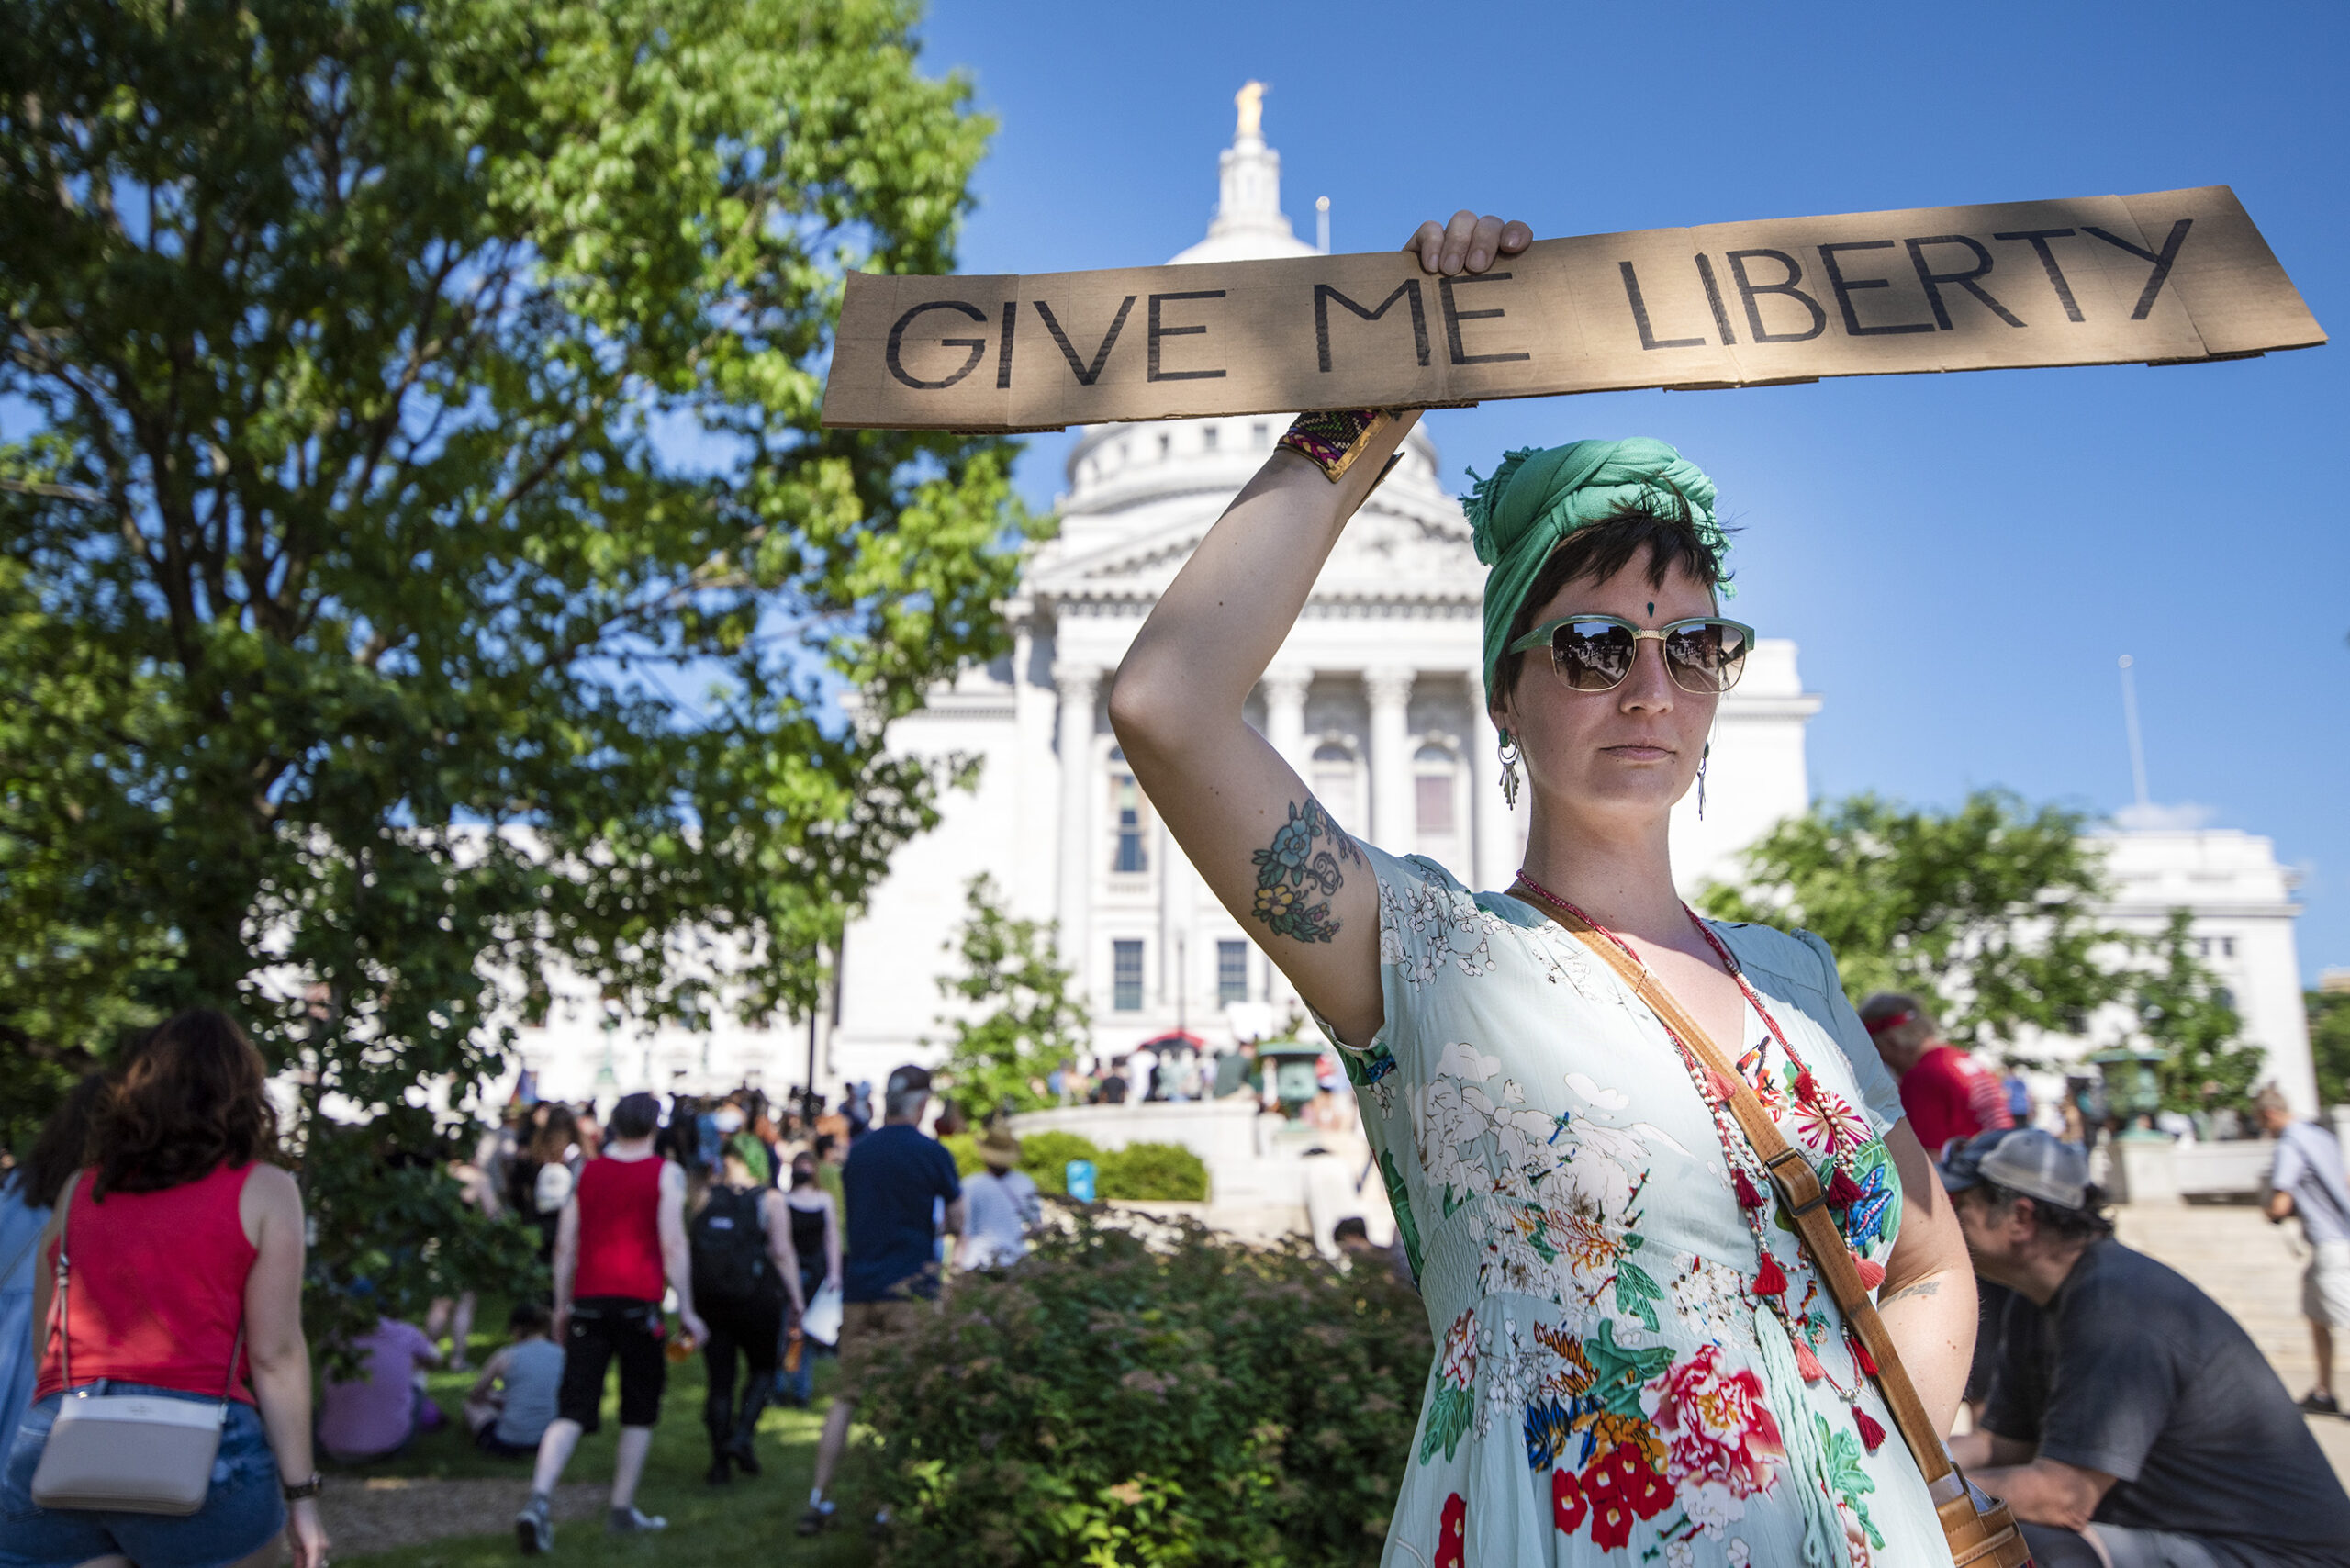 A protester's sign says "give me liberty."